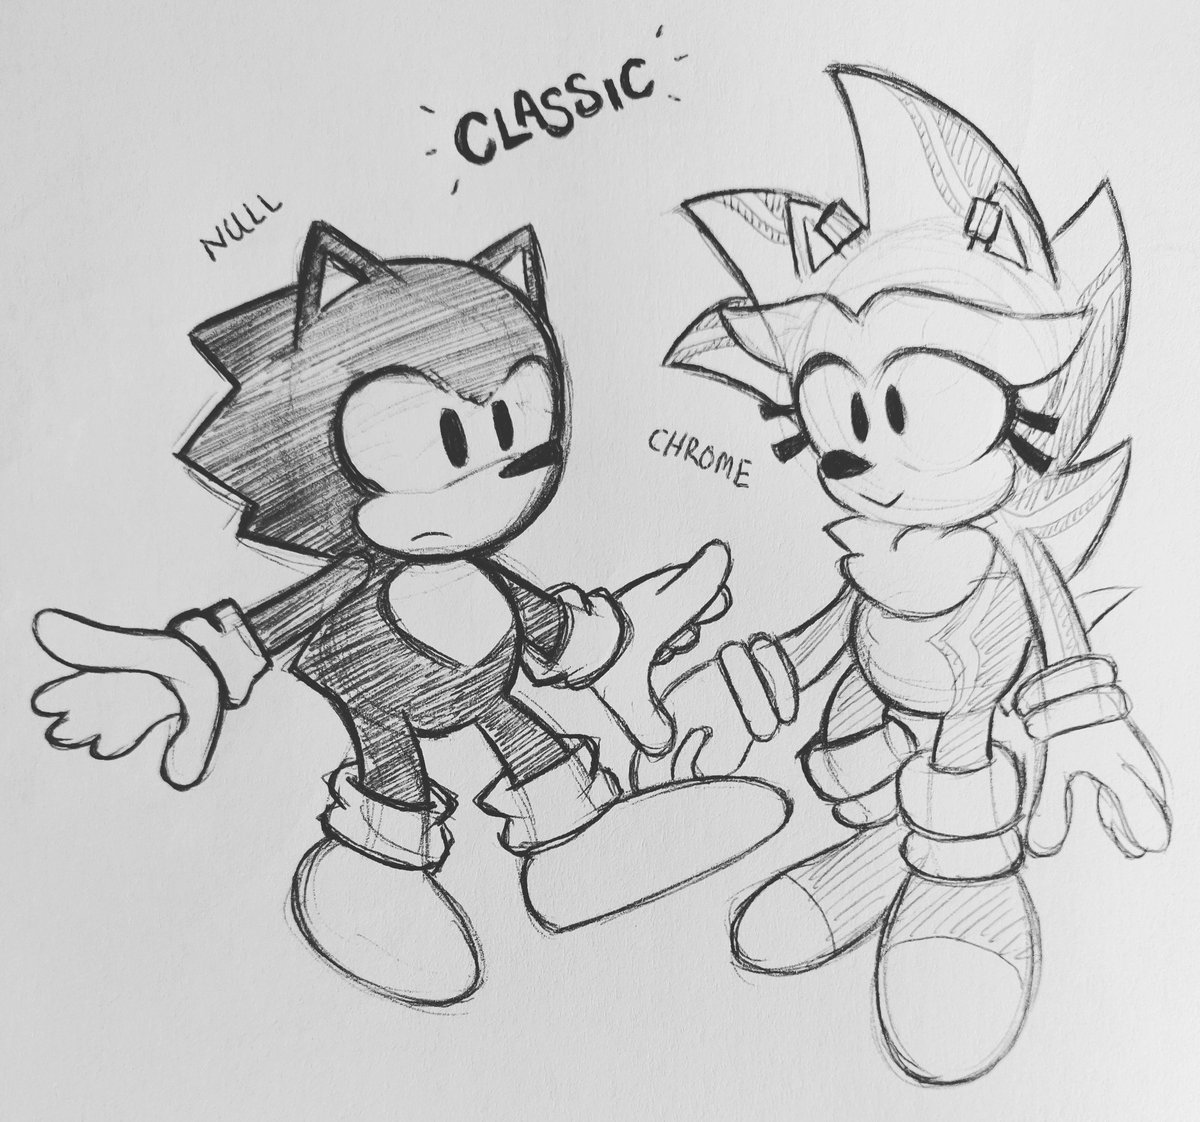 doodles of classic sonic versions of Null and Chrome~~ ??
#SonicTheHedgehog 